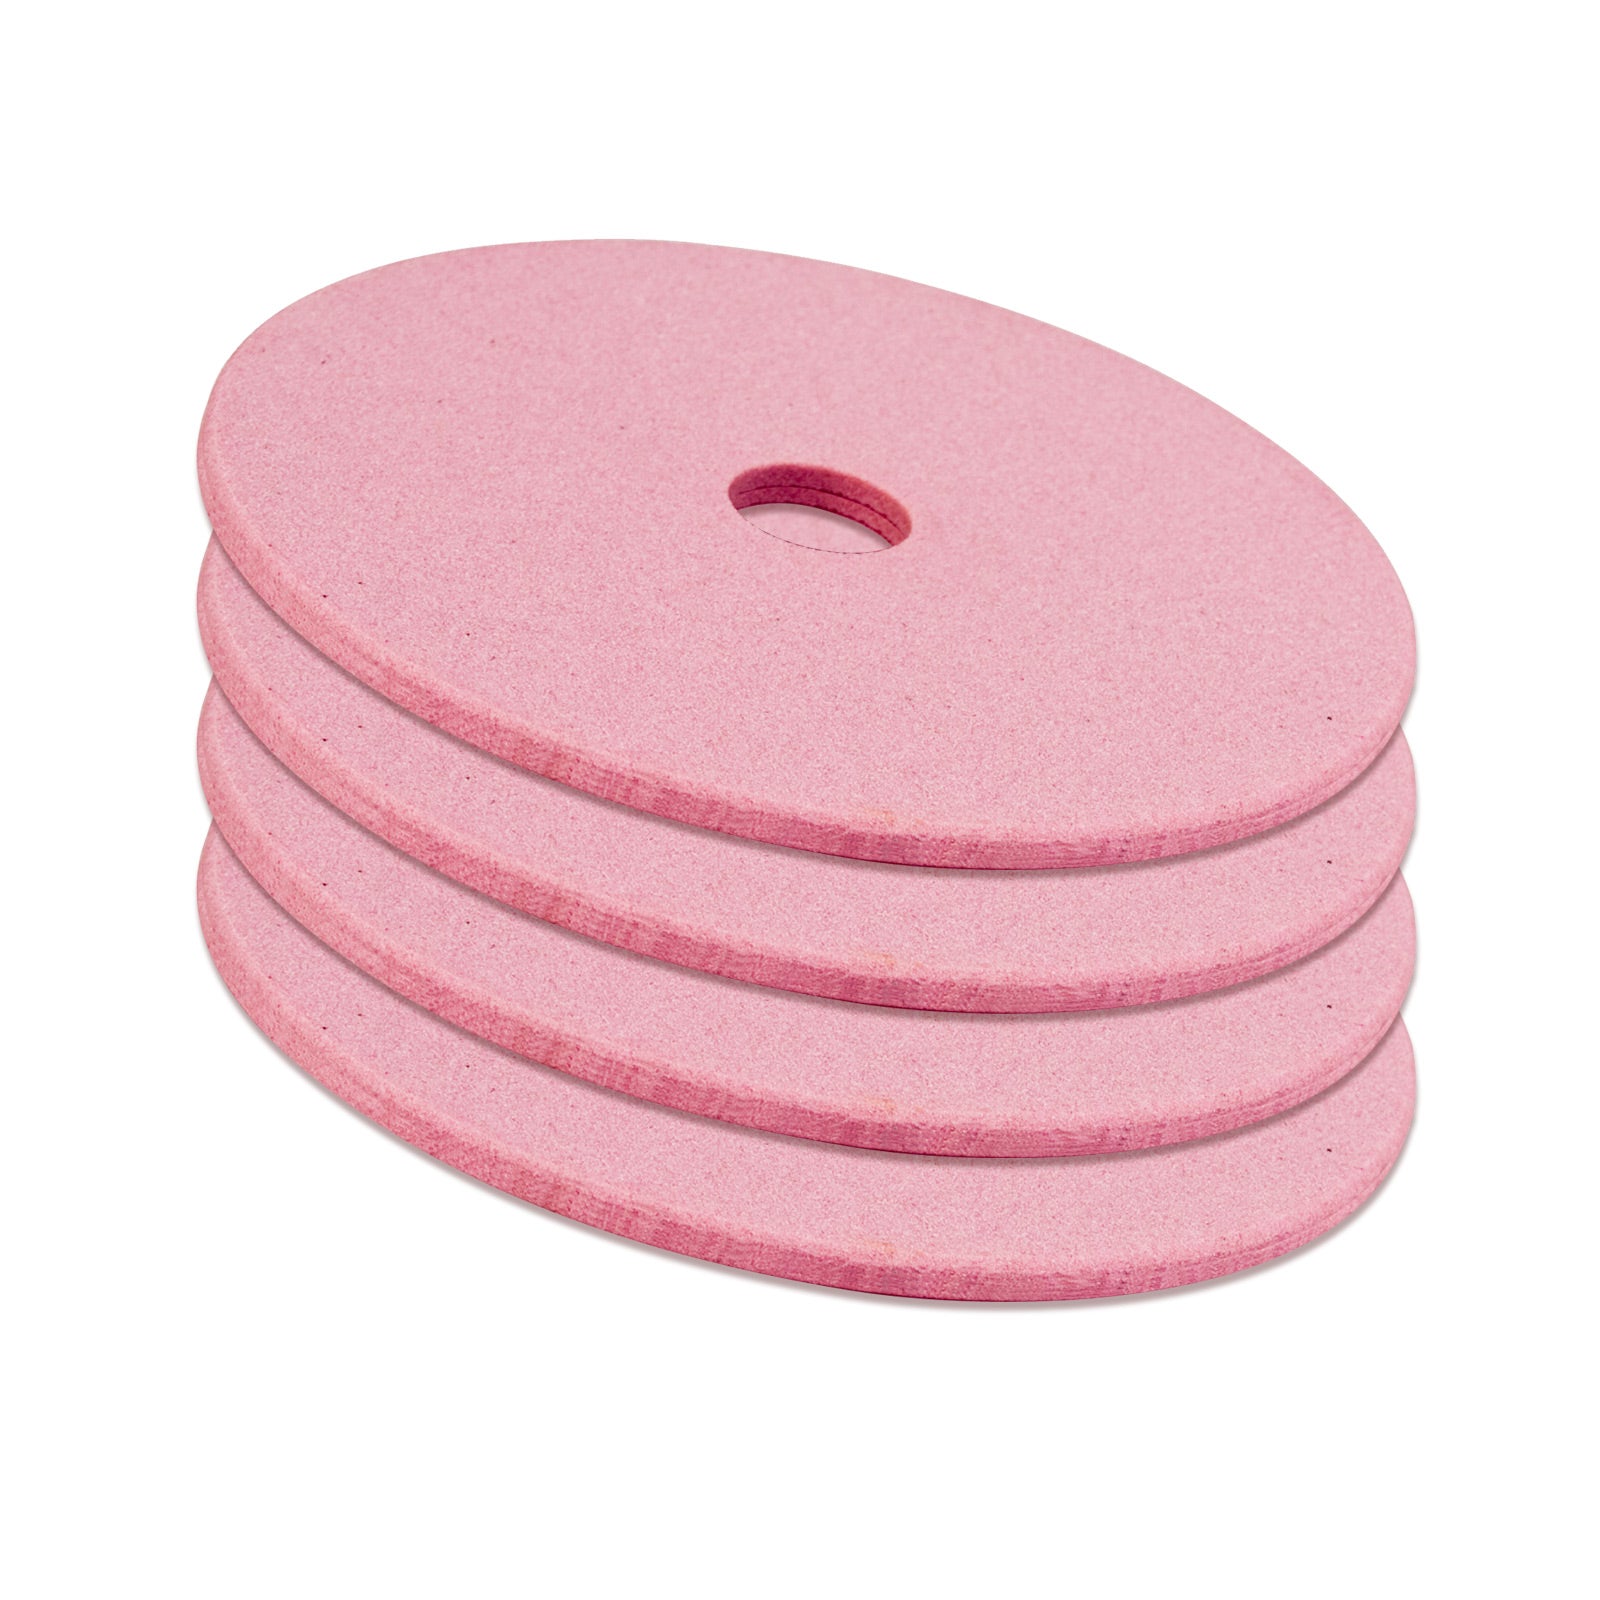 4X Grinding Disc for 350W Chainsaw Sharpener .404 145mm Thick - SILBERSHELL